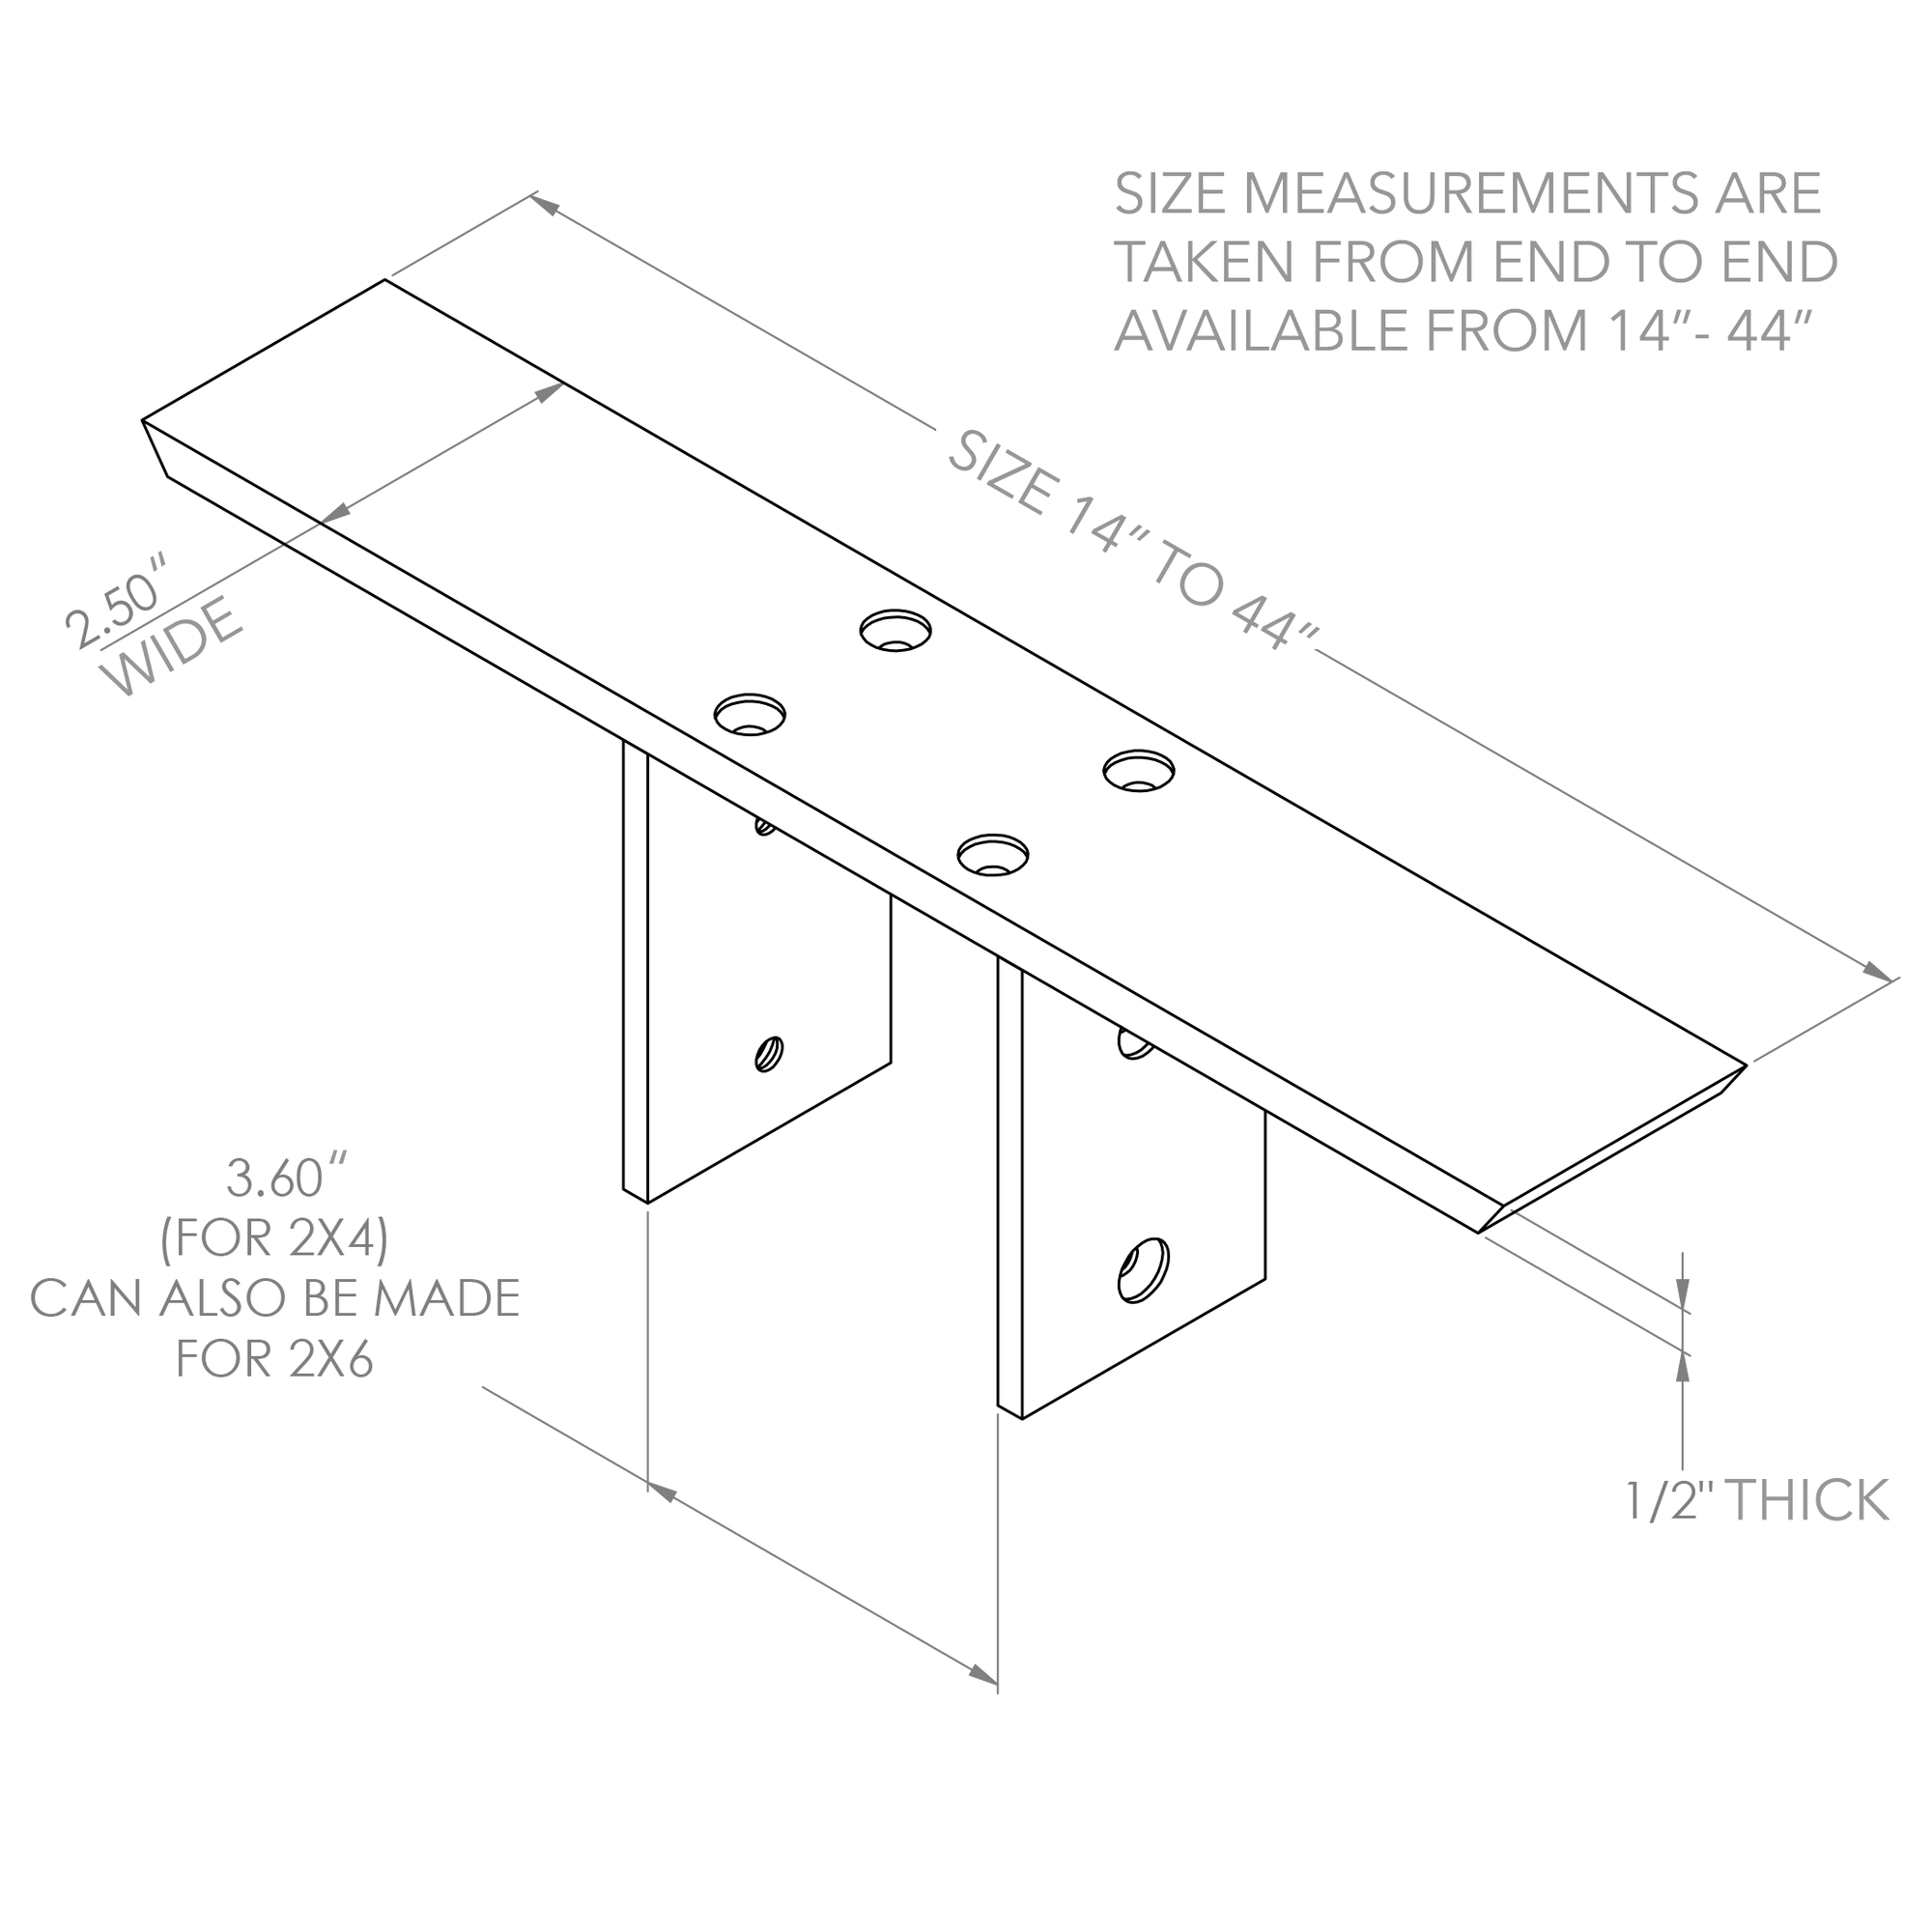 Center Mount Bracket spec sheet showing size lengths and thickness. Versatile countertop overhang support.